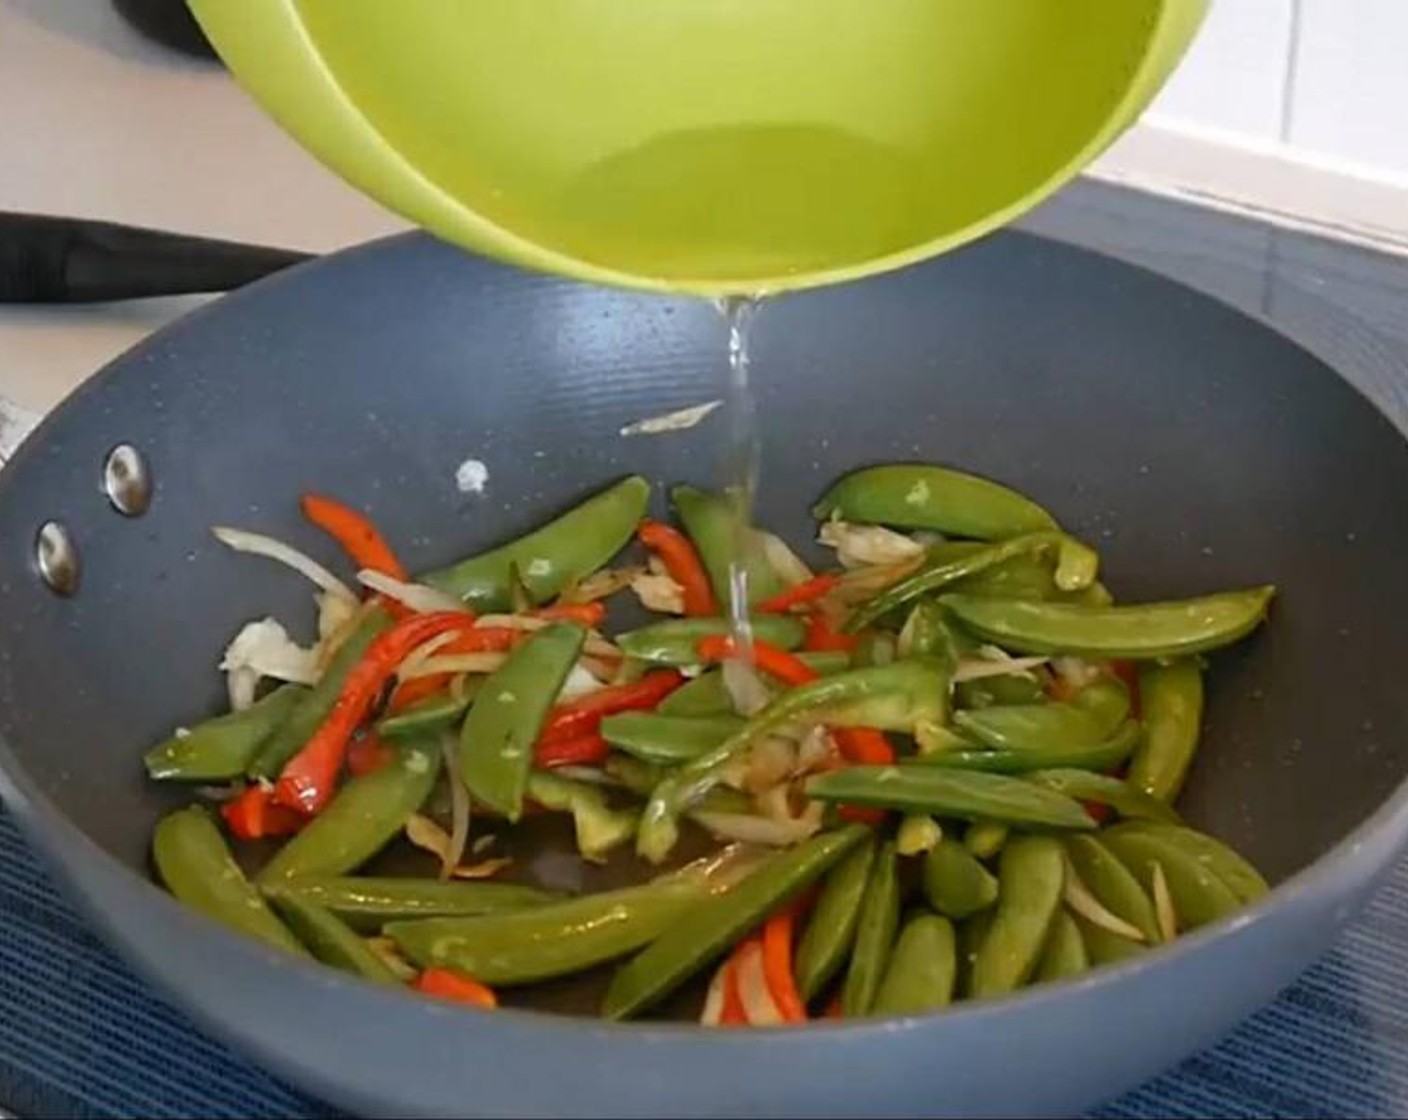 step 3 Then add the Garlic (1 clove). Stir and add the Sugar Snap Peas (1 cup) and stir again. Add a splash of water to get the cooking going without adding extra oil. Leave to cook for a couple of minutes